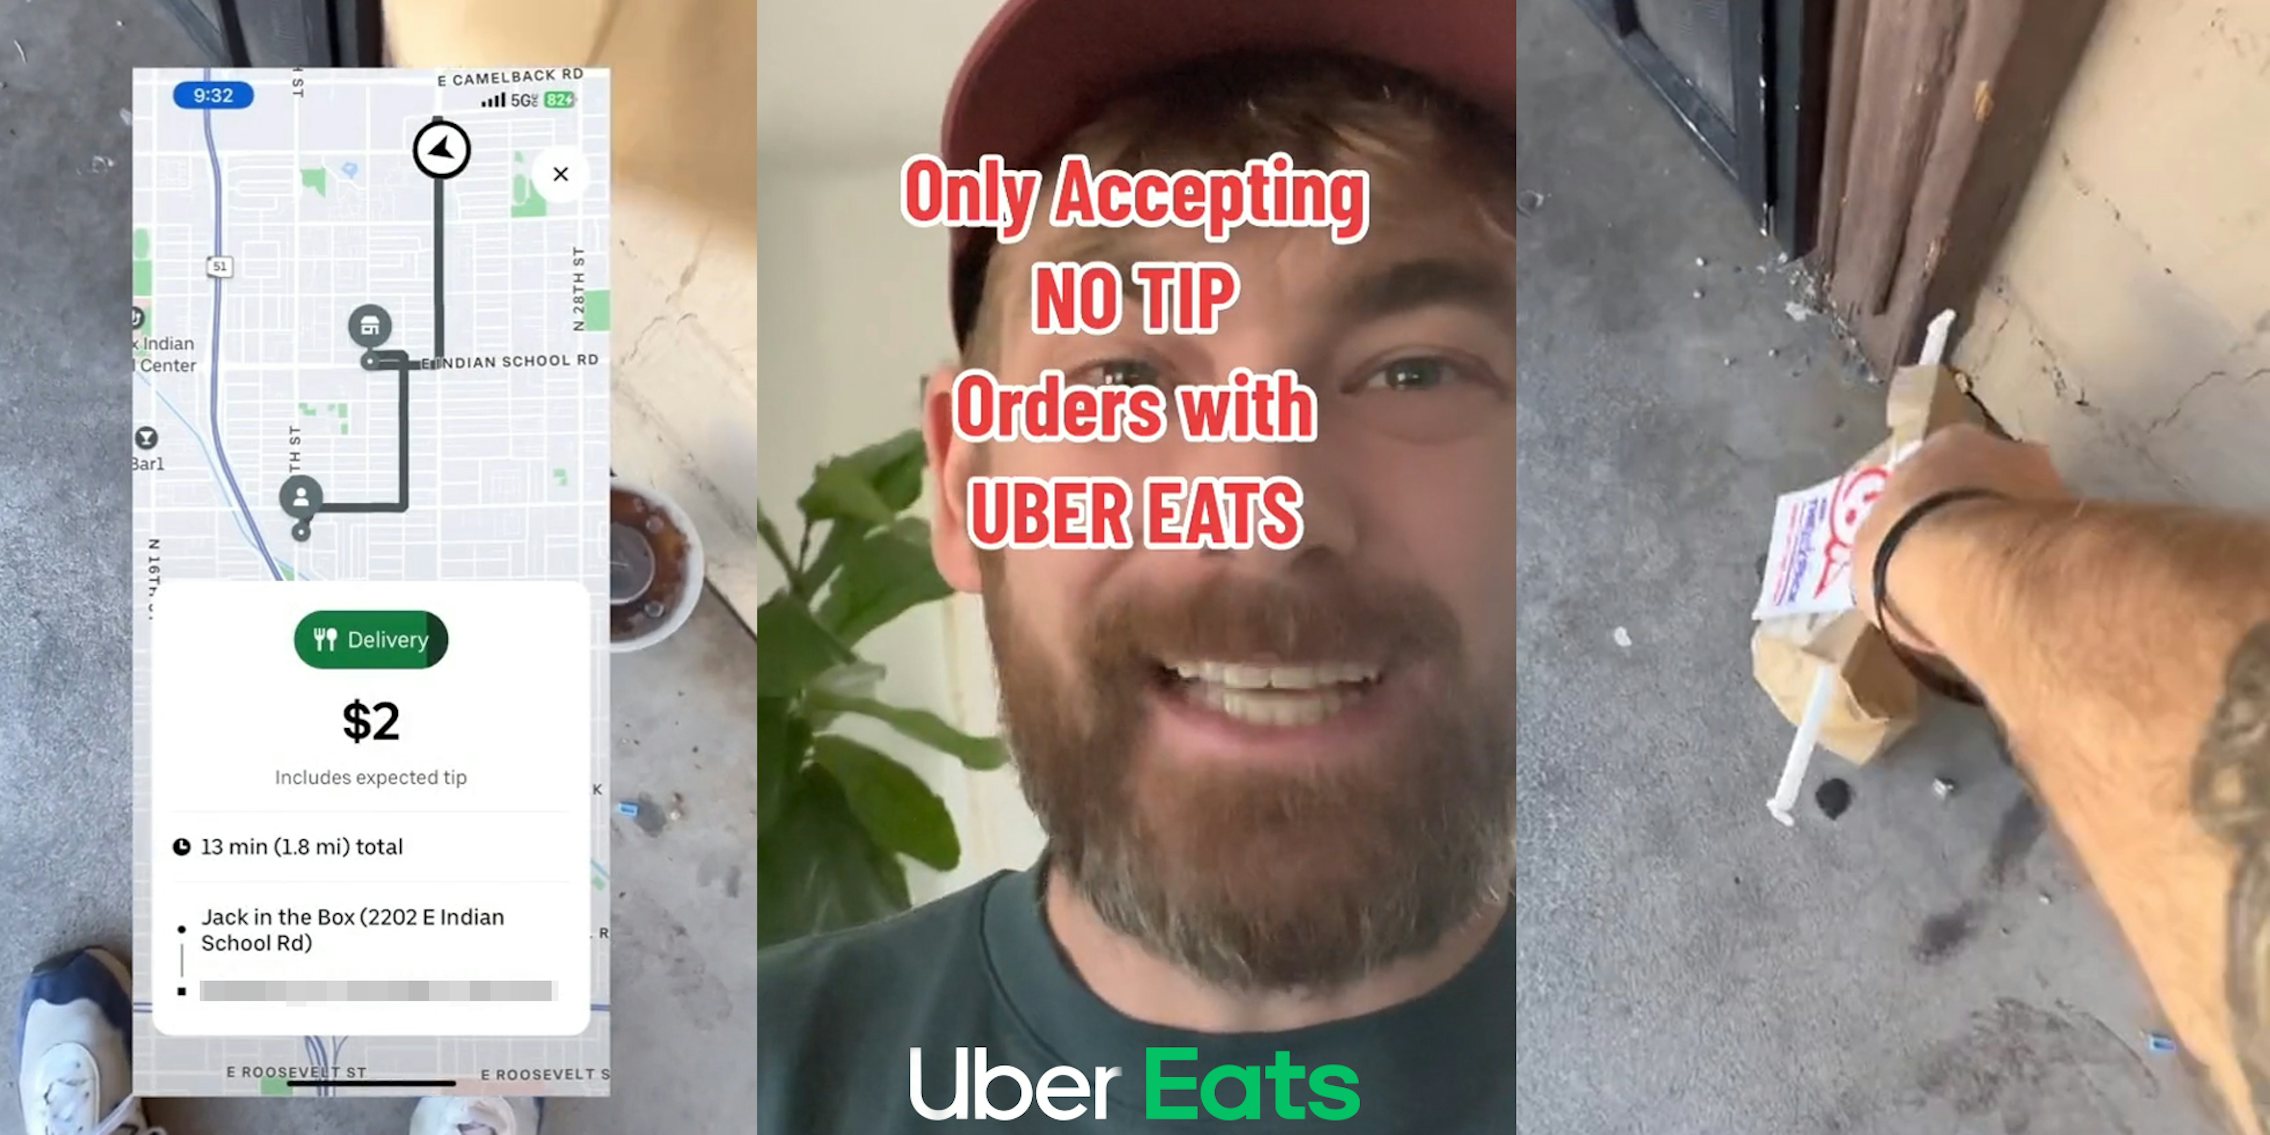 Uber Eats order on screen in front of driver delivering order at door (l) Uber Eats driver speaking with Uber Eats logo at bottom with caption 'Only Accepting NO TIP Orders with UBER EATS' (c) Uber Eats driver placing order at door (r)